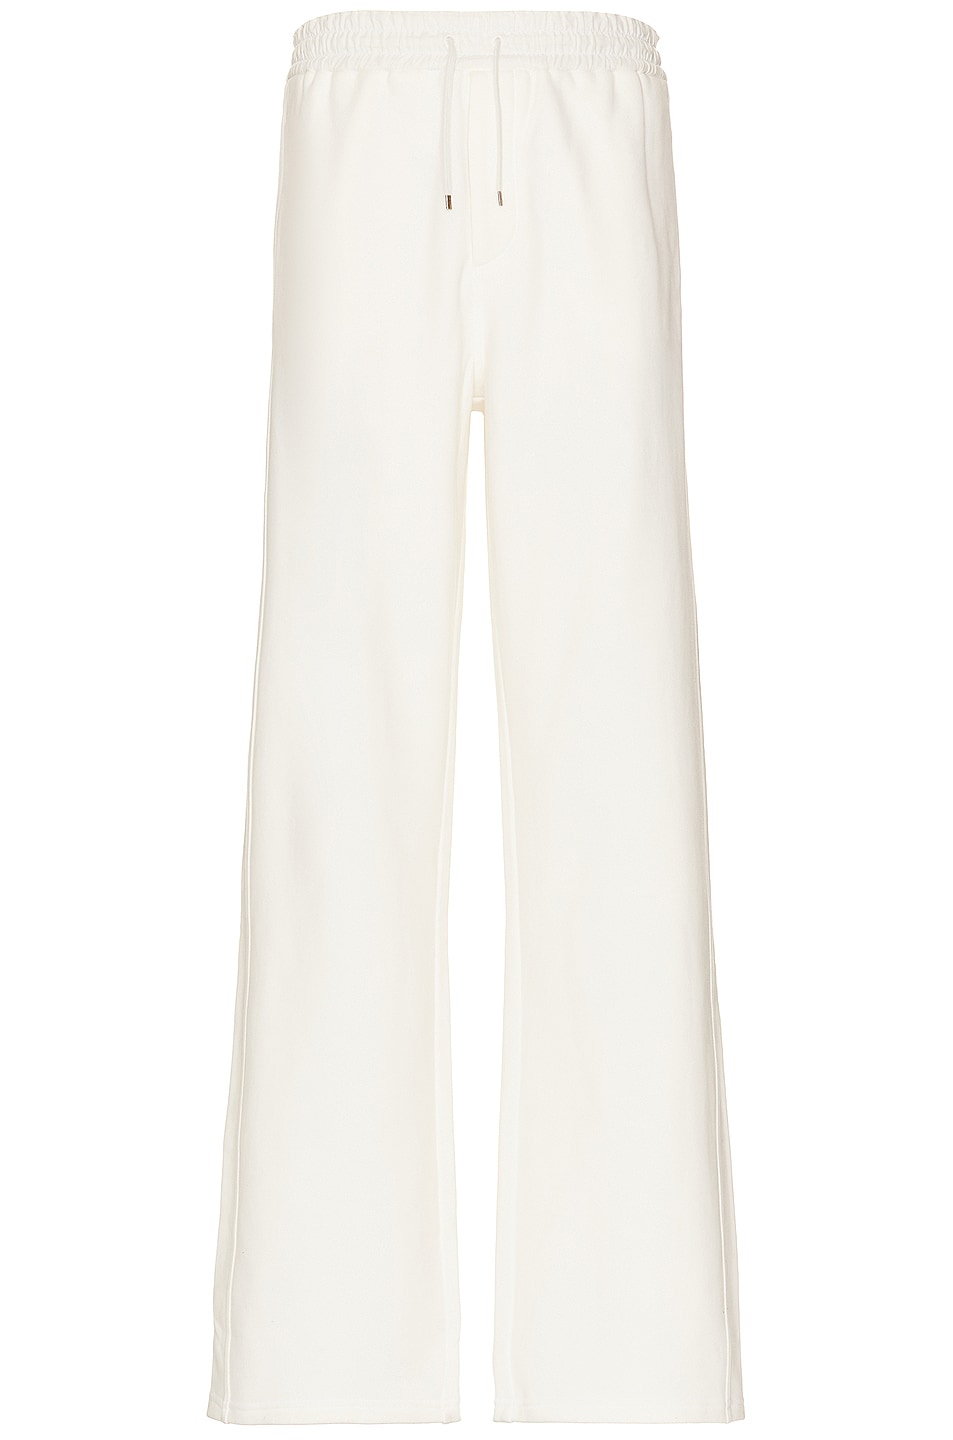 Image 1 of Saint Laurent Jambes Droit Pant in Biancospino